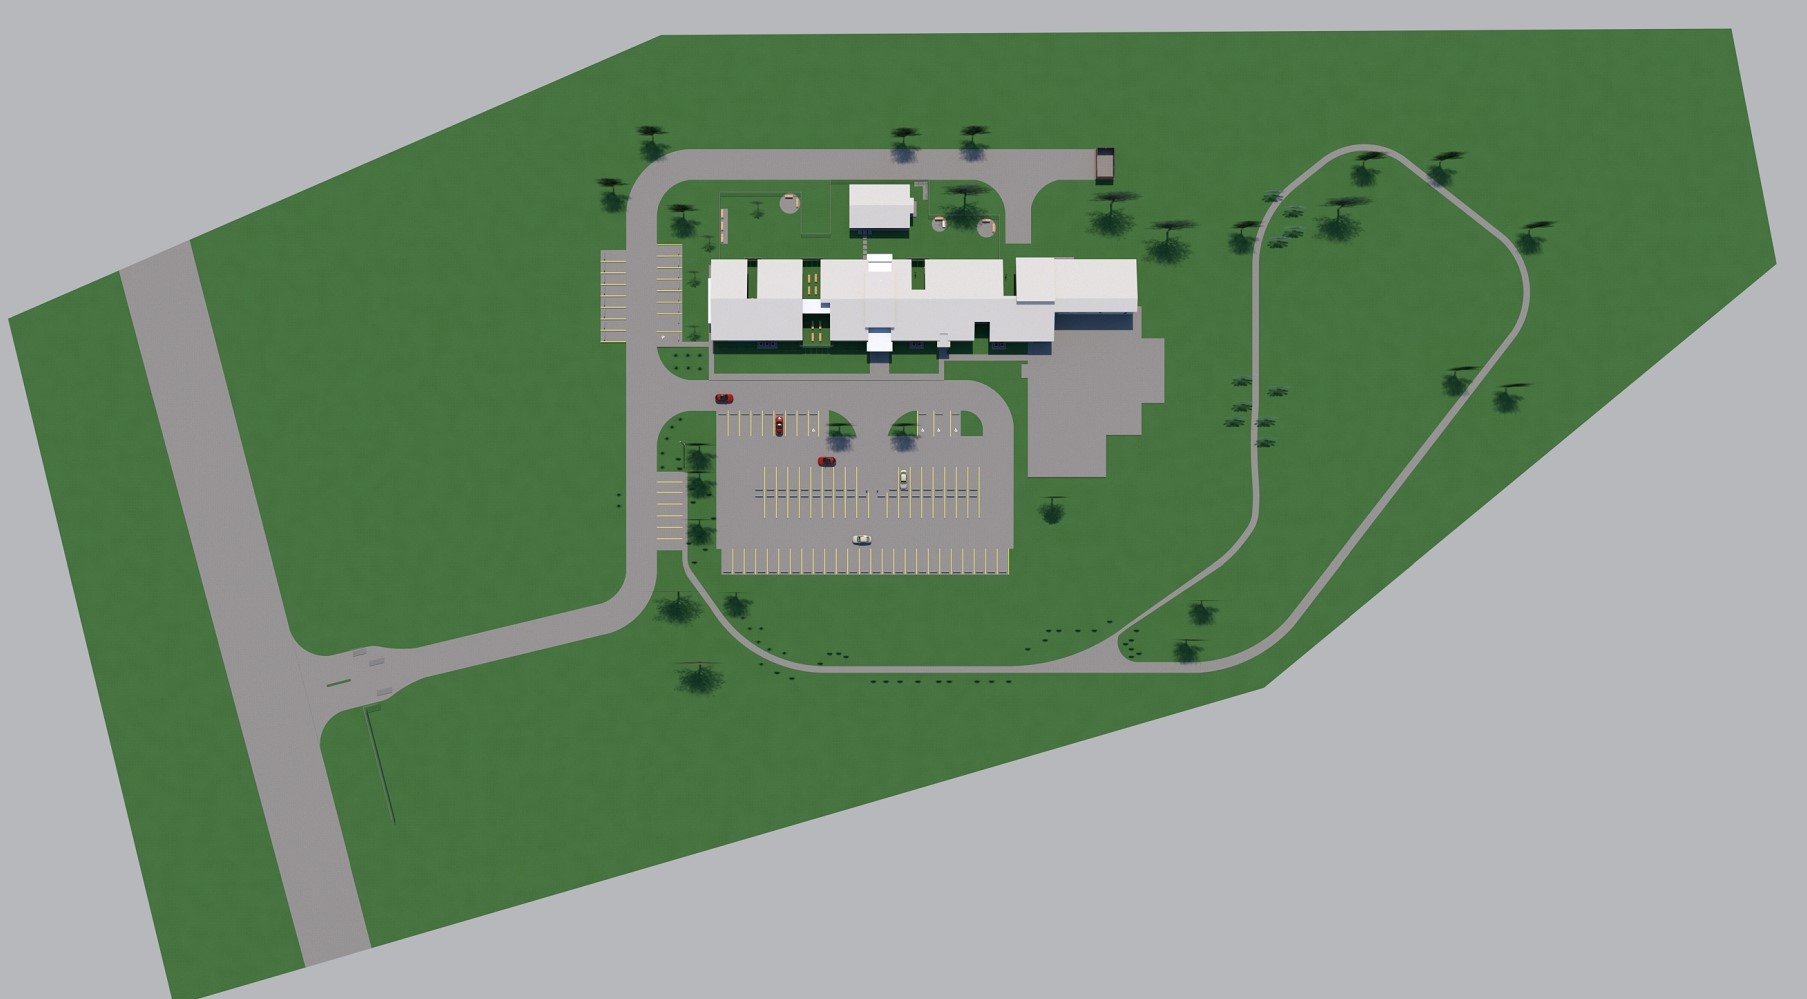 A computer generated image of the layout of an airport.